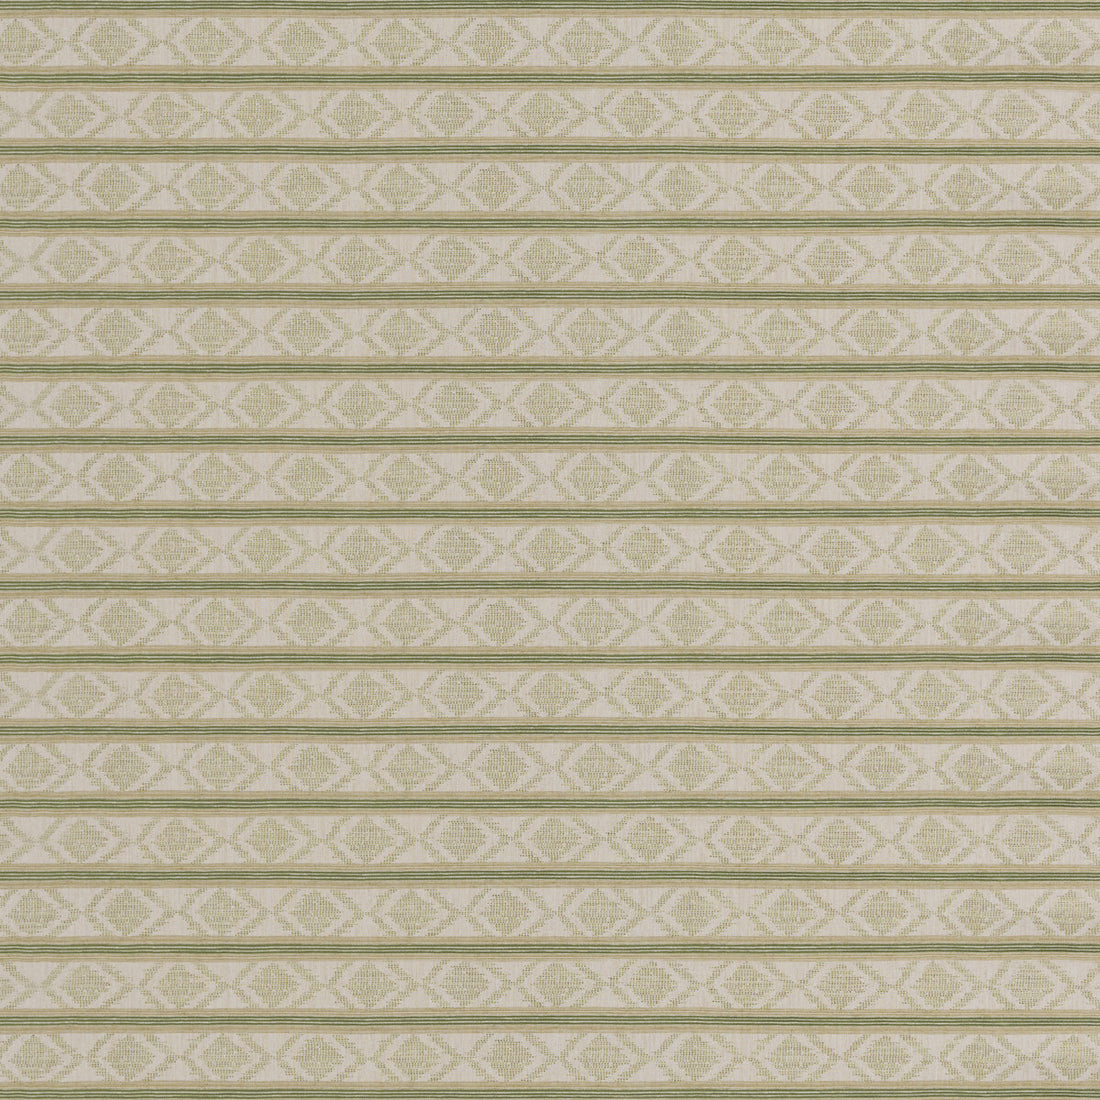 Burford Stripe fabric in green color - pattern BF11034.8.0 - by G P &amp; J Baker in the Burford Weaves collection